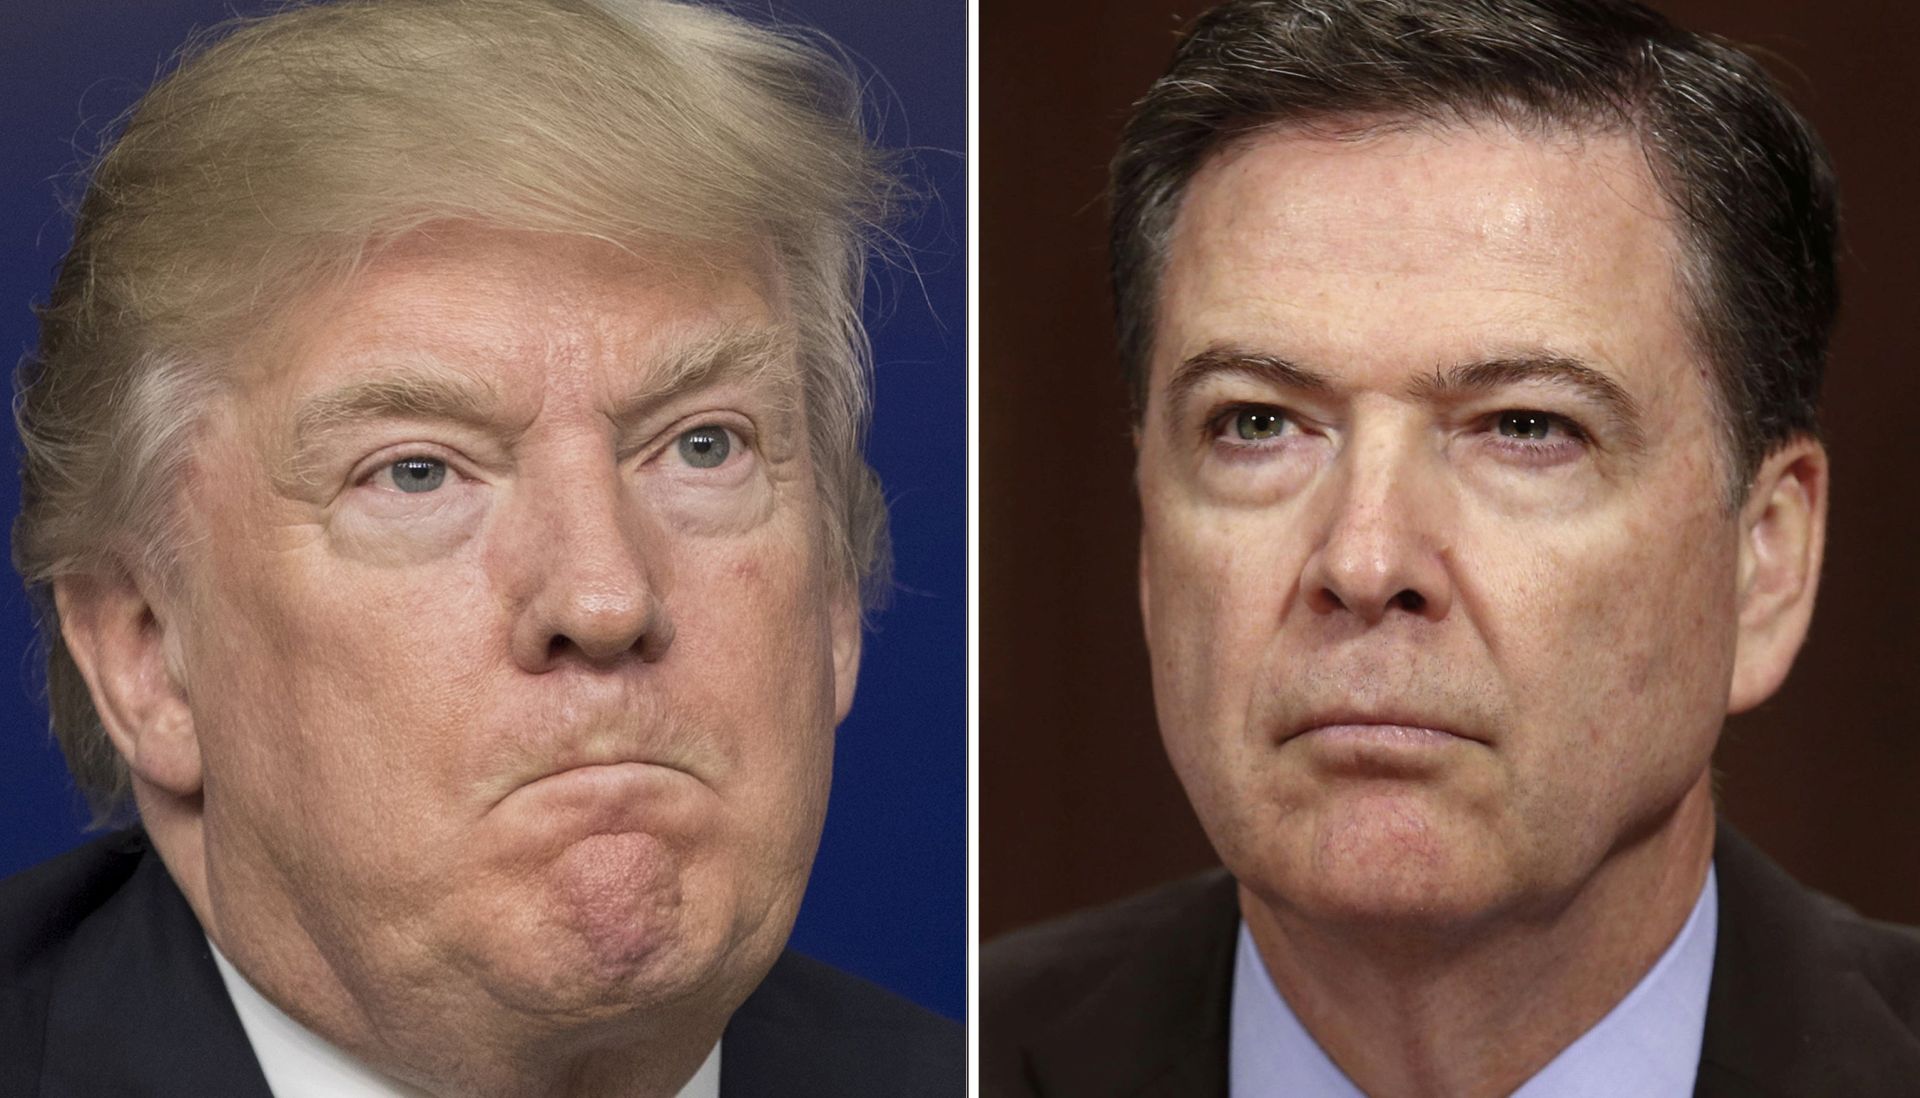 epa06017264 (FILE) - A combo file picture showing US President Donald J. Trump (L) participating in a town hall meeting on the business climate in the United States, in the Eisenhower Executive Office Building at the White House complex in Washington, DC, USA, 04 April 2017, and FBI Director James Comey (R) testifying before the Senate Judiciary Committee hearing on 'Oversight of the Federal Bureau of Investigation.' on Capitol Hill in Washington, DC, USA, 03 May 2017. According to media reports 08 June 2017, fired FBI chief Comey testified before Congress at a hearing that the White House claims that the FBI was 'poorly led' were ' lies, plain and simple'.  EPA/MICHAEL REYNOLDS/SHAWN THEW